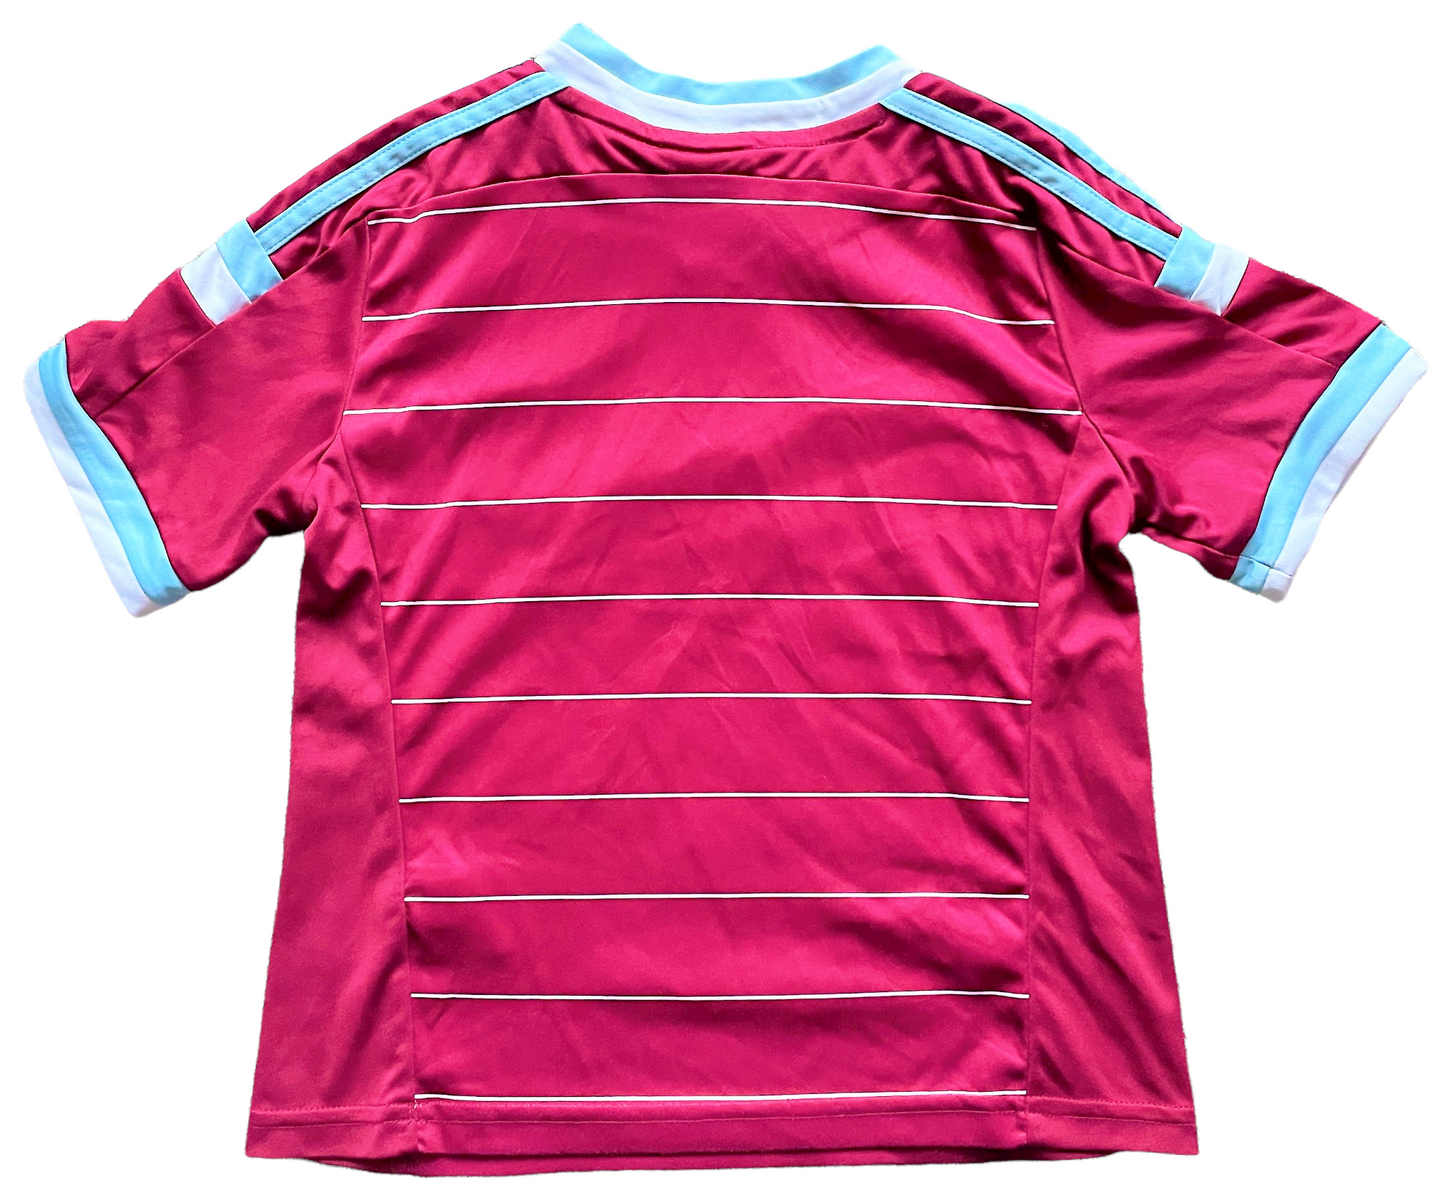 West Ham 2014 Home Shirt (very good) Childs 4-5 years. Height 15 inches